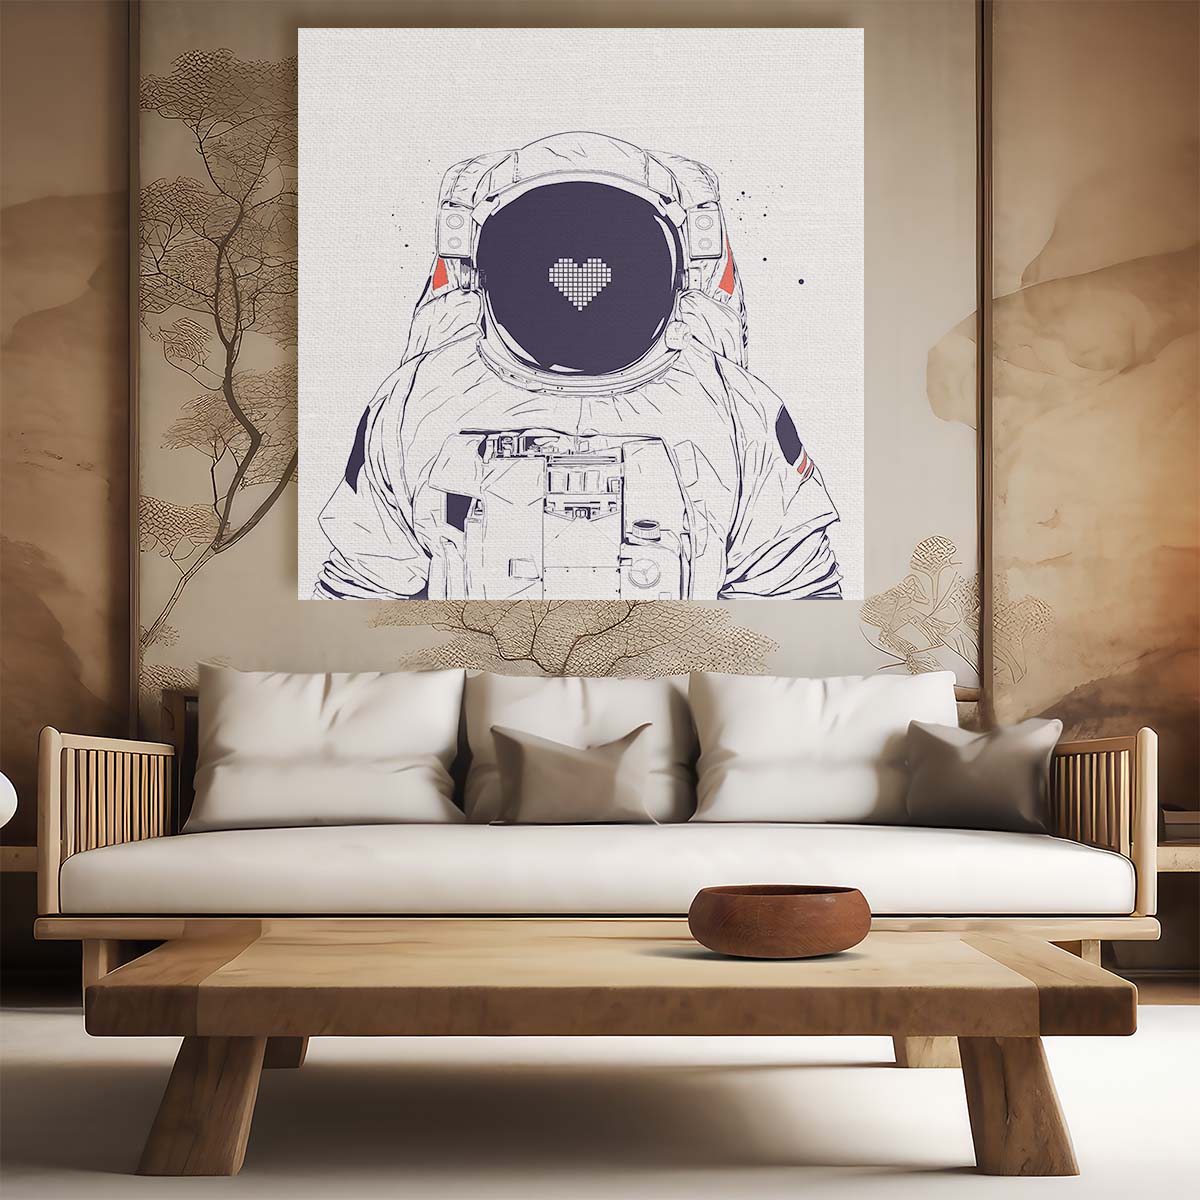 Starry Sky Embrace Romantic Astronaut Couple Illustration Wall Art by Luxuriance Designs. Made in USA.